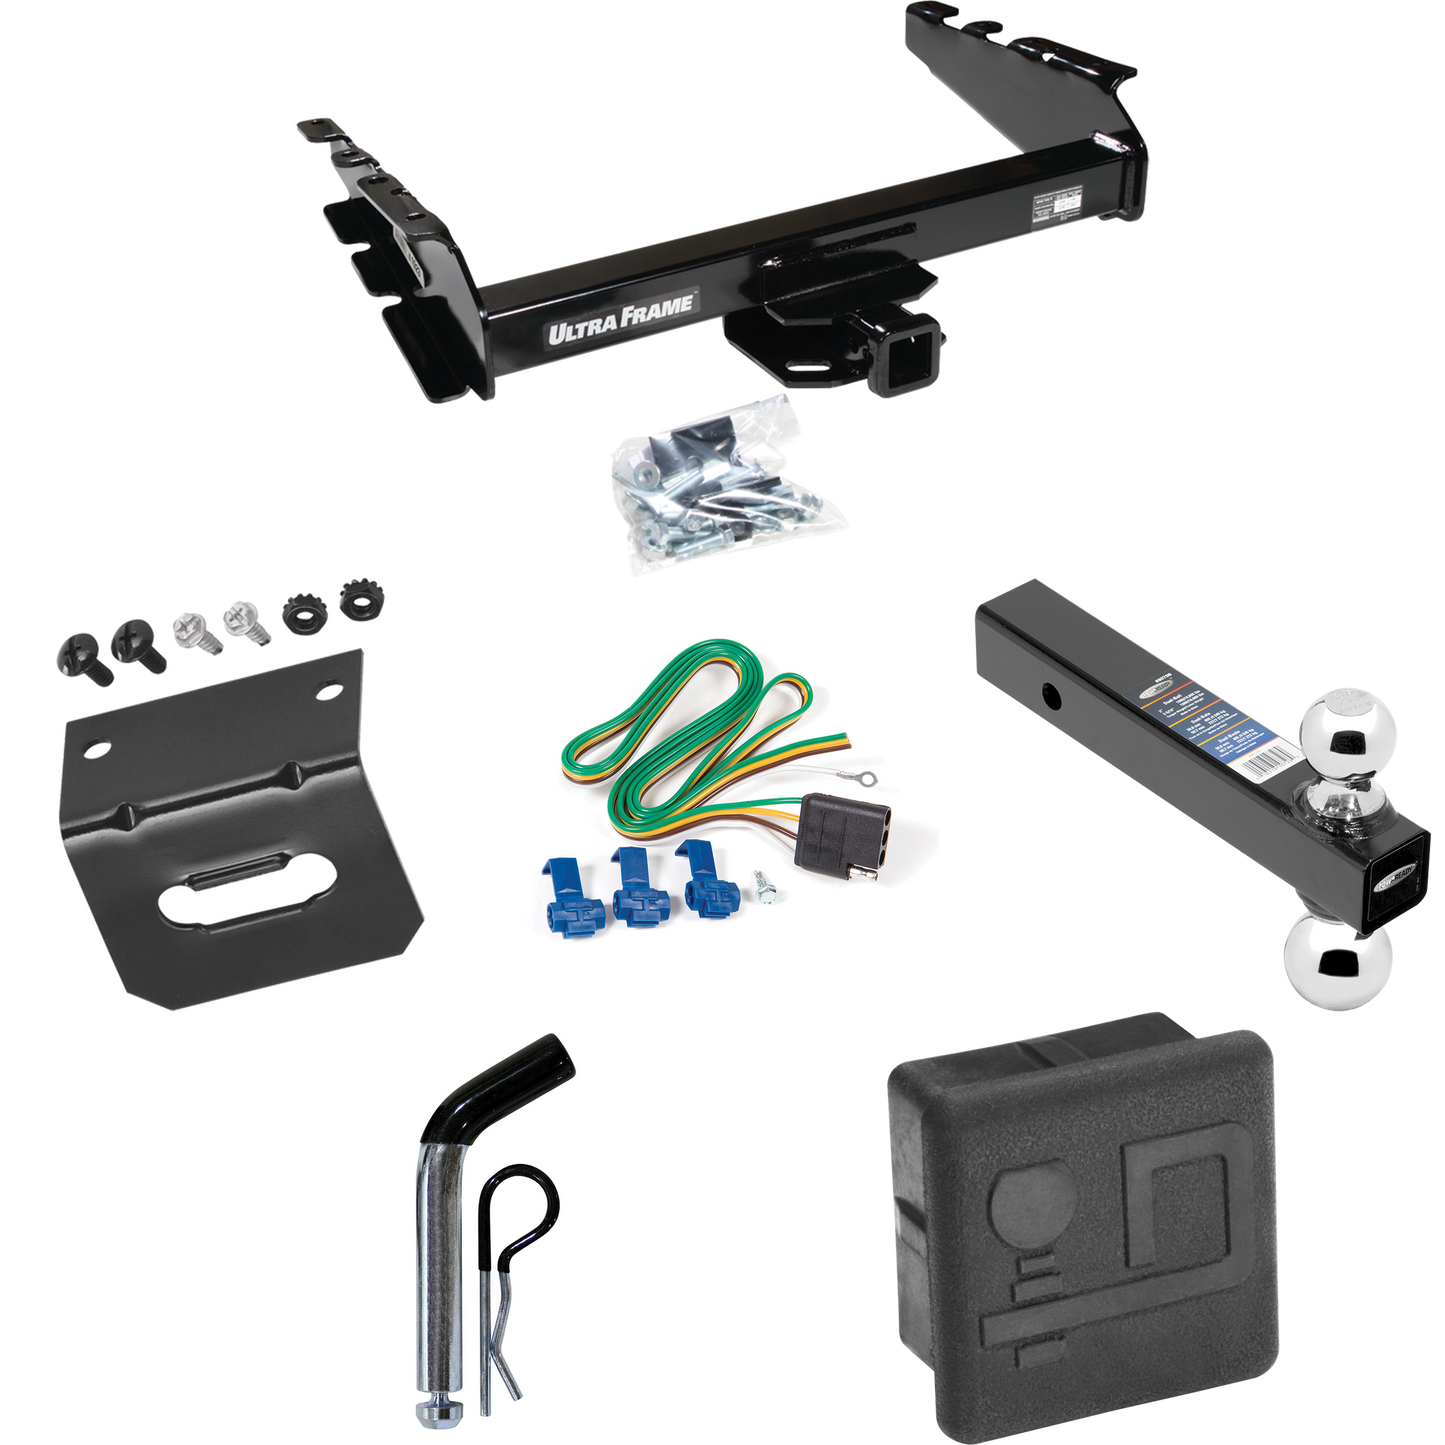 Fits 1994-1994 Dodge Ram 1500 Trailer Hitch Tow PKG w/ 4-Flat Wiring Harness + Dual Ball Ball Mount 2" & 2-5/16" Trailer Balls + Pin/Clip + Hitch Cover + Wiring Bracket By Draw-Tite